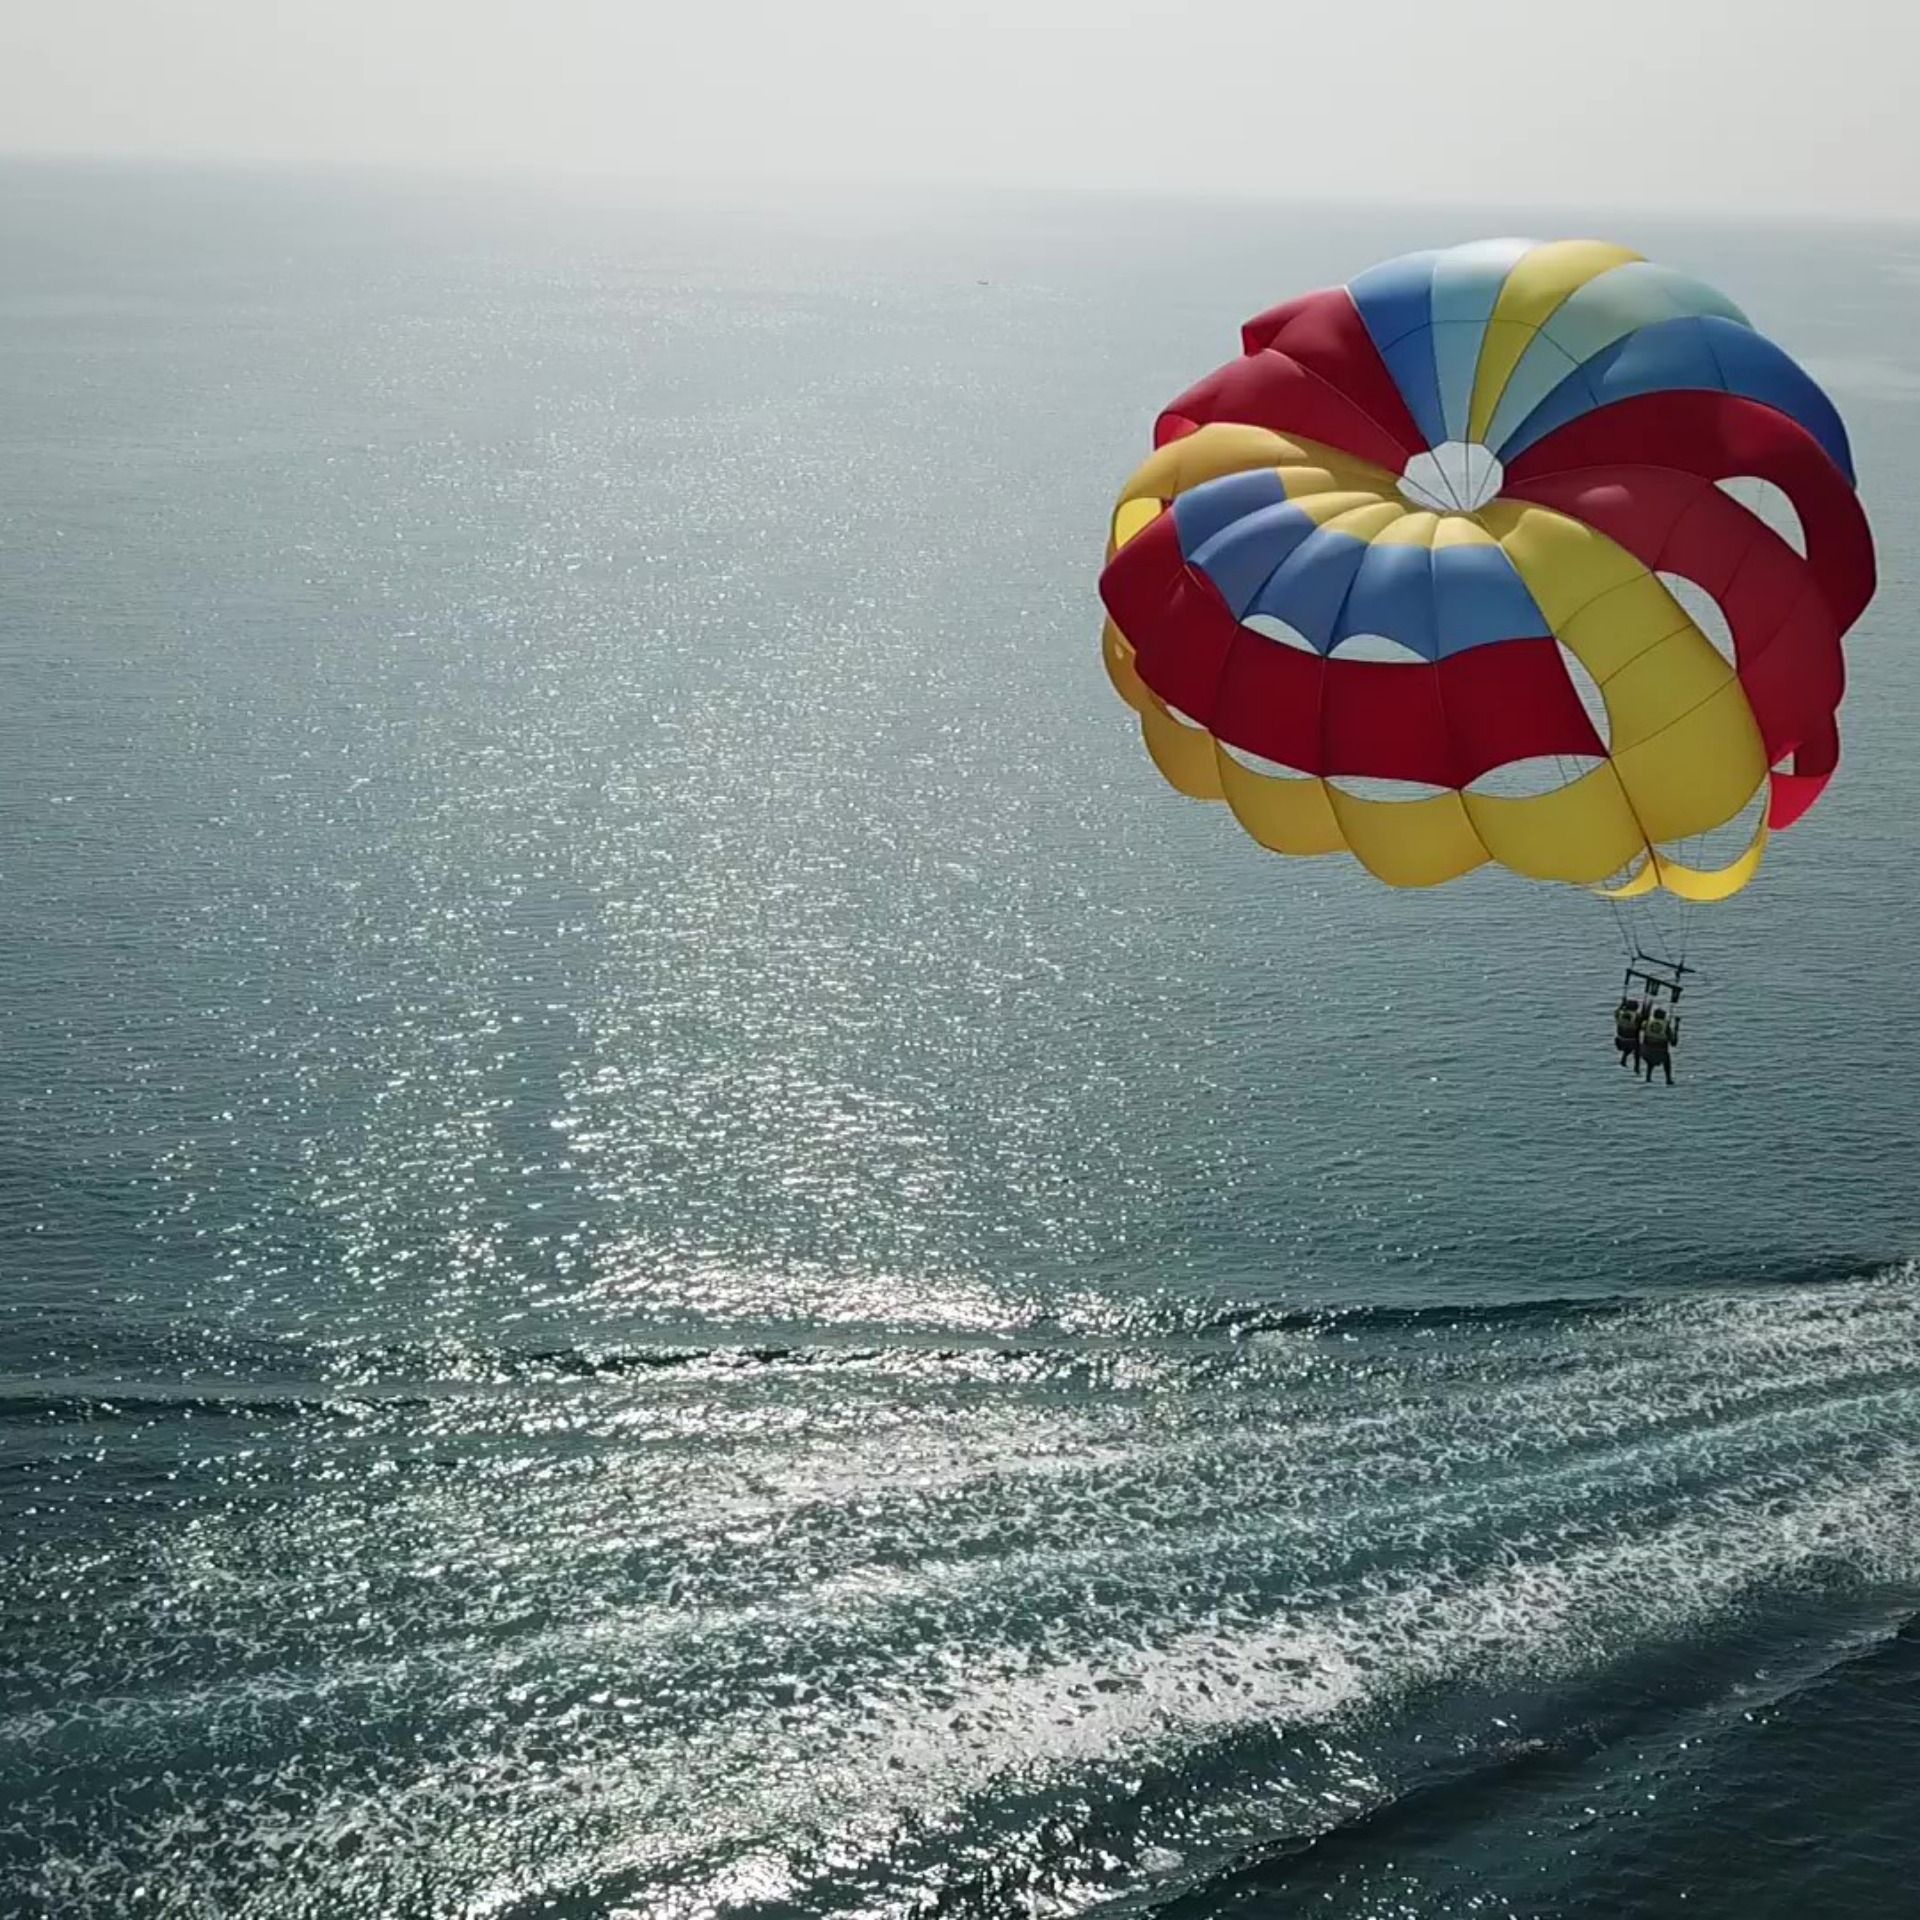 Parasailing: Several hundred feet away from the ground, The breathtaking view down below, Amusements. 1920x1920 HD Wallpaper.